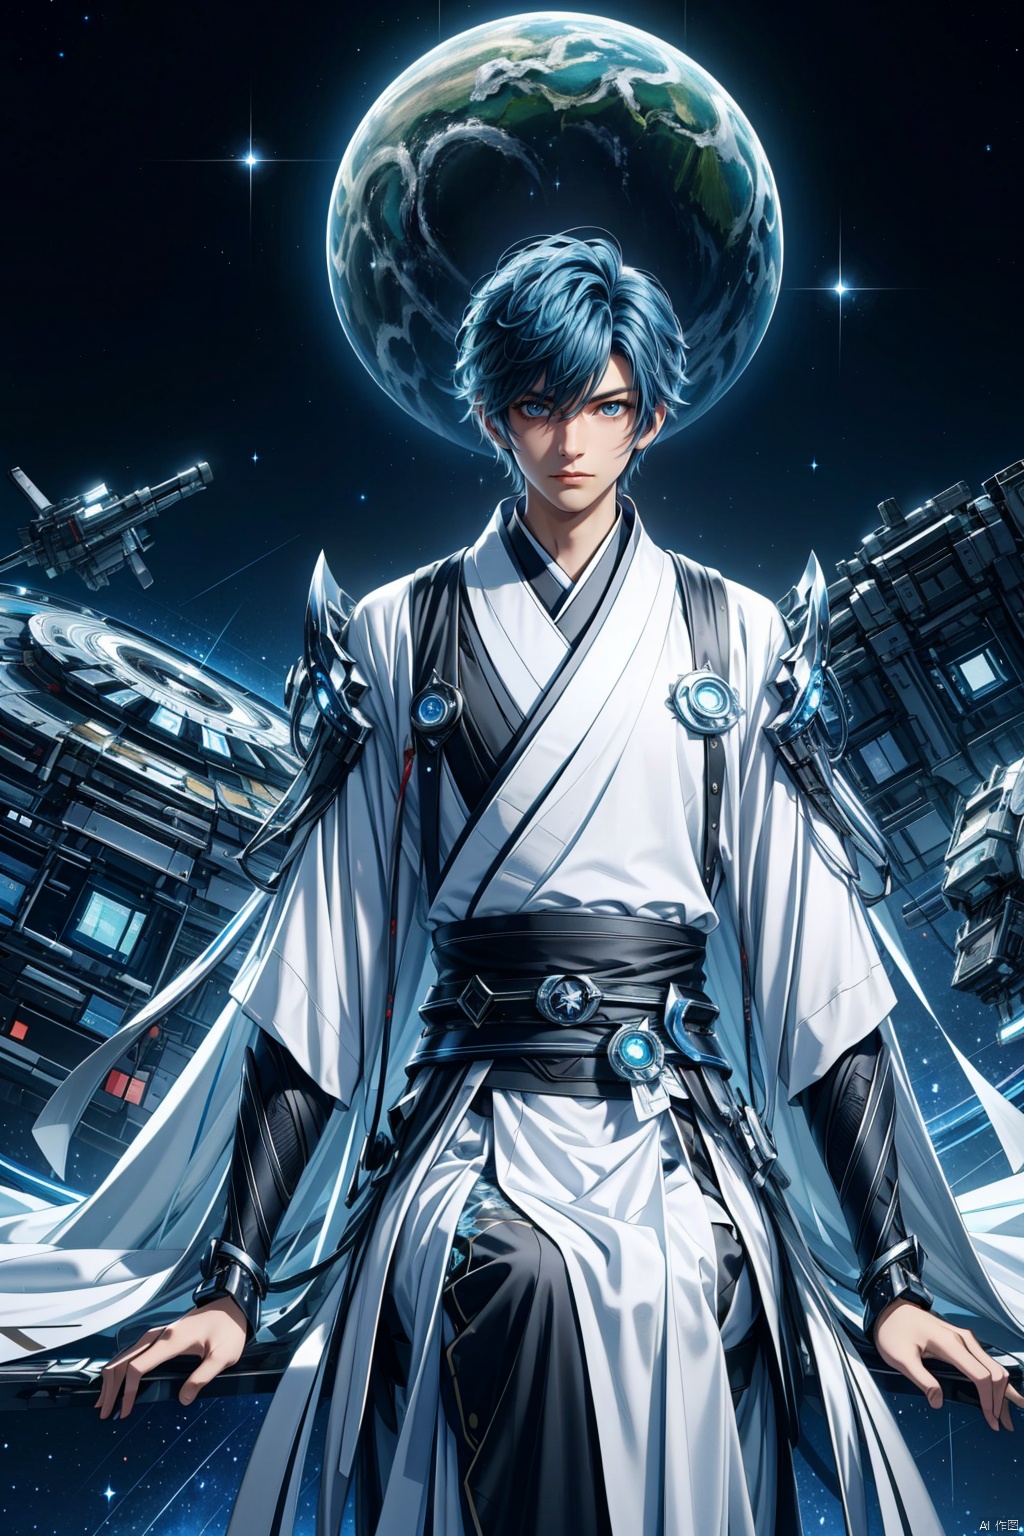  (8k, original photo, best quality, masterpiece: 1.2),1 boy. Blue hair, white and black Hanfu, futuristic robe. Sitting on a research platform floating in the middle of the asteroid belt. He is conducting research with a notebook, surrounded by several asteroids shining with blazing halos. Dramatic lights from distant stars and planets illuminated the scene, casting deep shadows on the Hanfu. The boy looks confident and determined, looking at the vast and mysterious universe with curiosity and respect, with a cowboy lens,Aso

